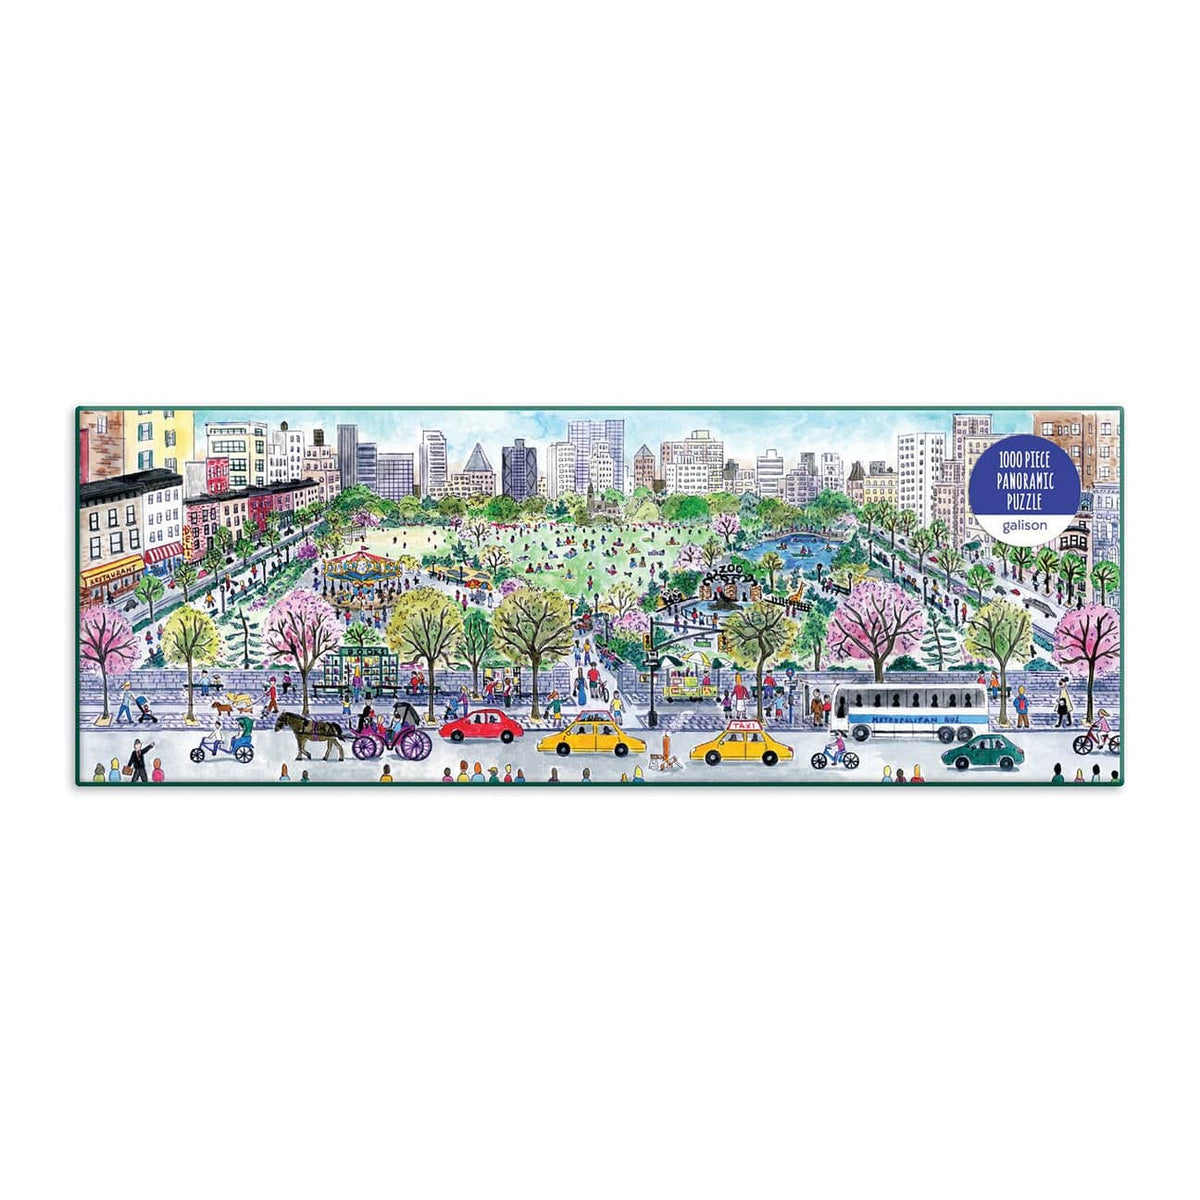 Michael Storrings Cityscape 1000 Piece Panoramic Jigsaw Puzzle - The Preppy Bunny